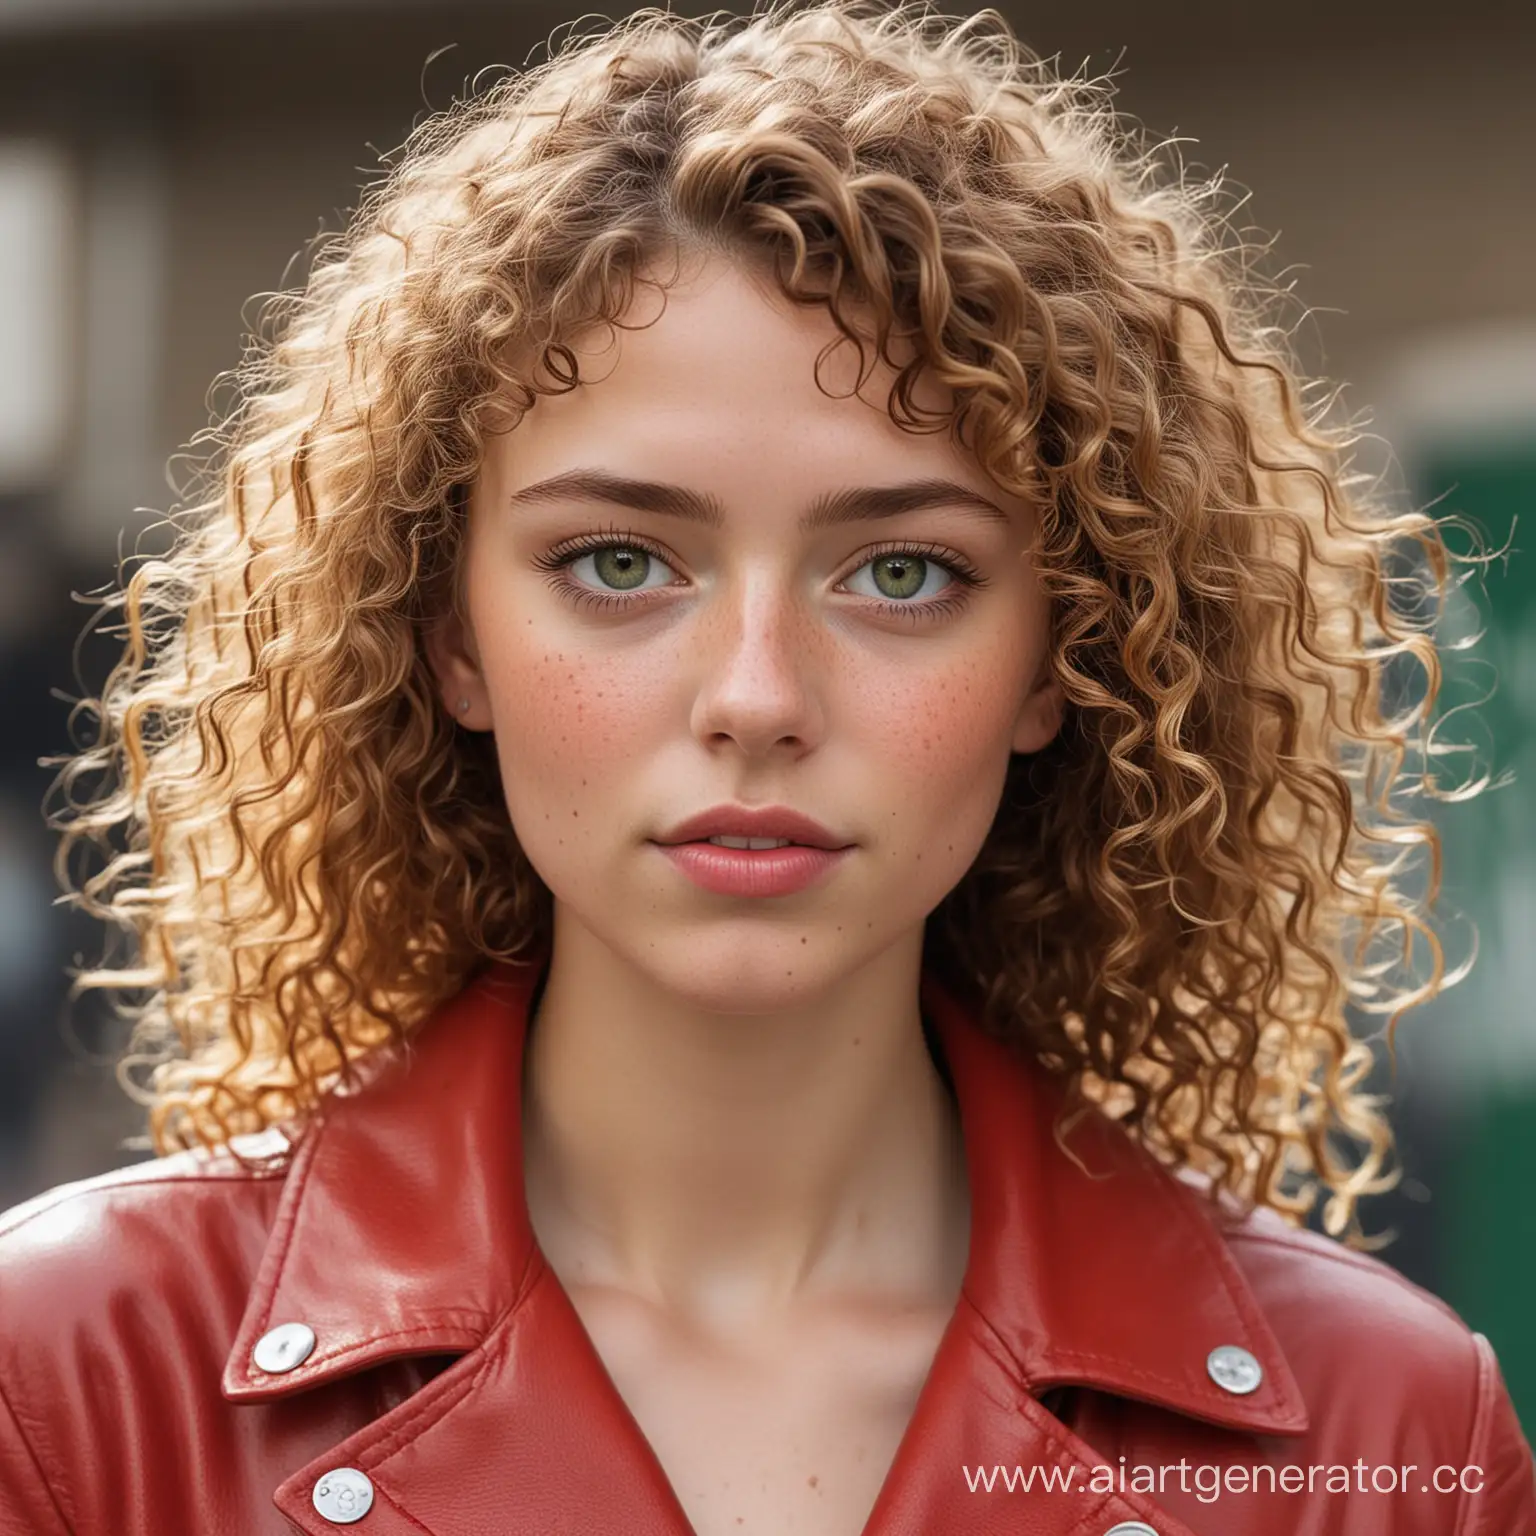 Curly-Haired-Girl-in-Red-Leather-Jacket-with-Freckles-and-Green-Eyes